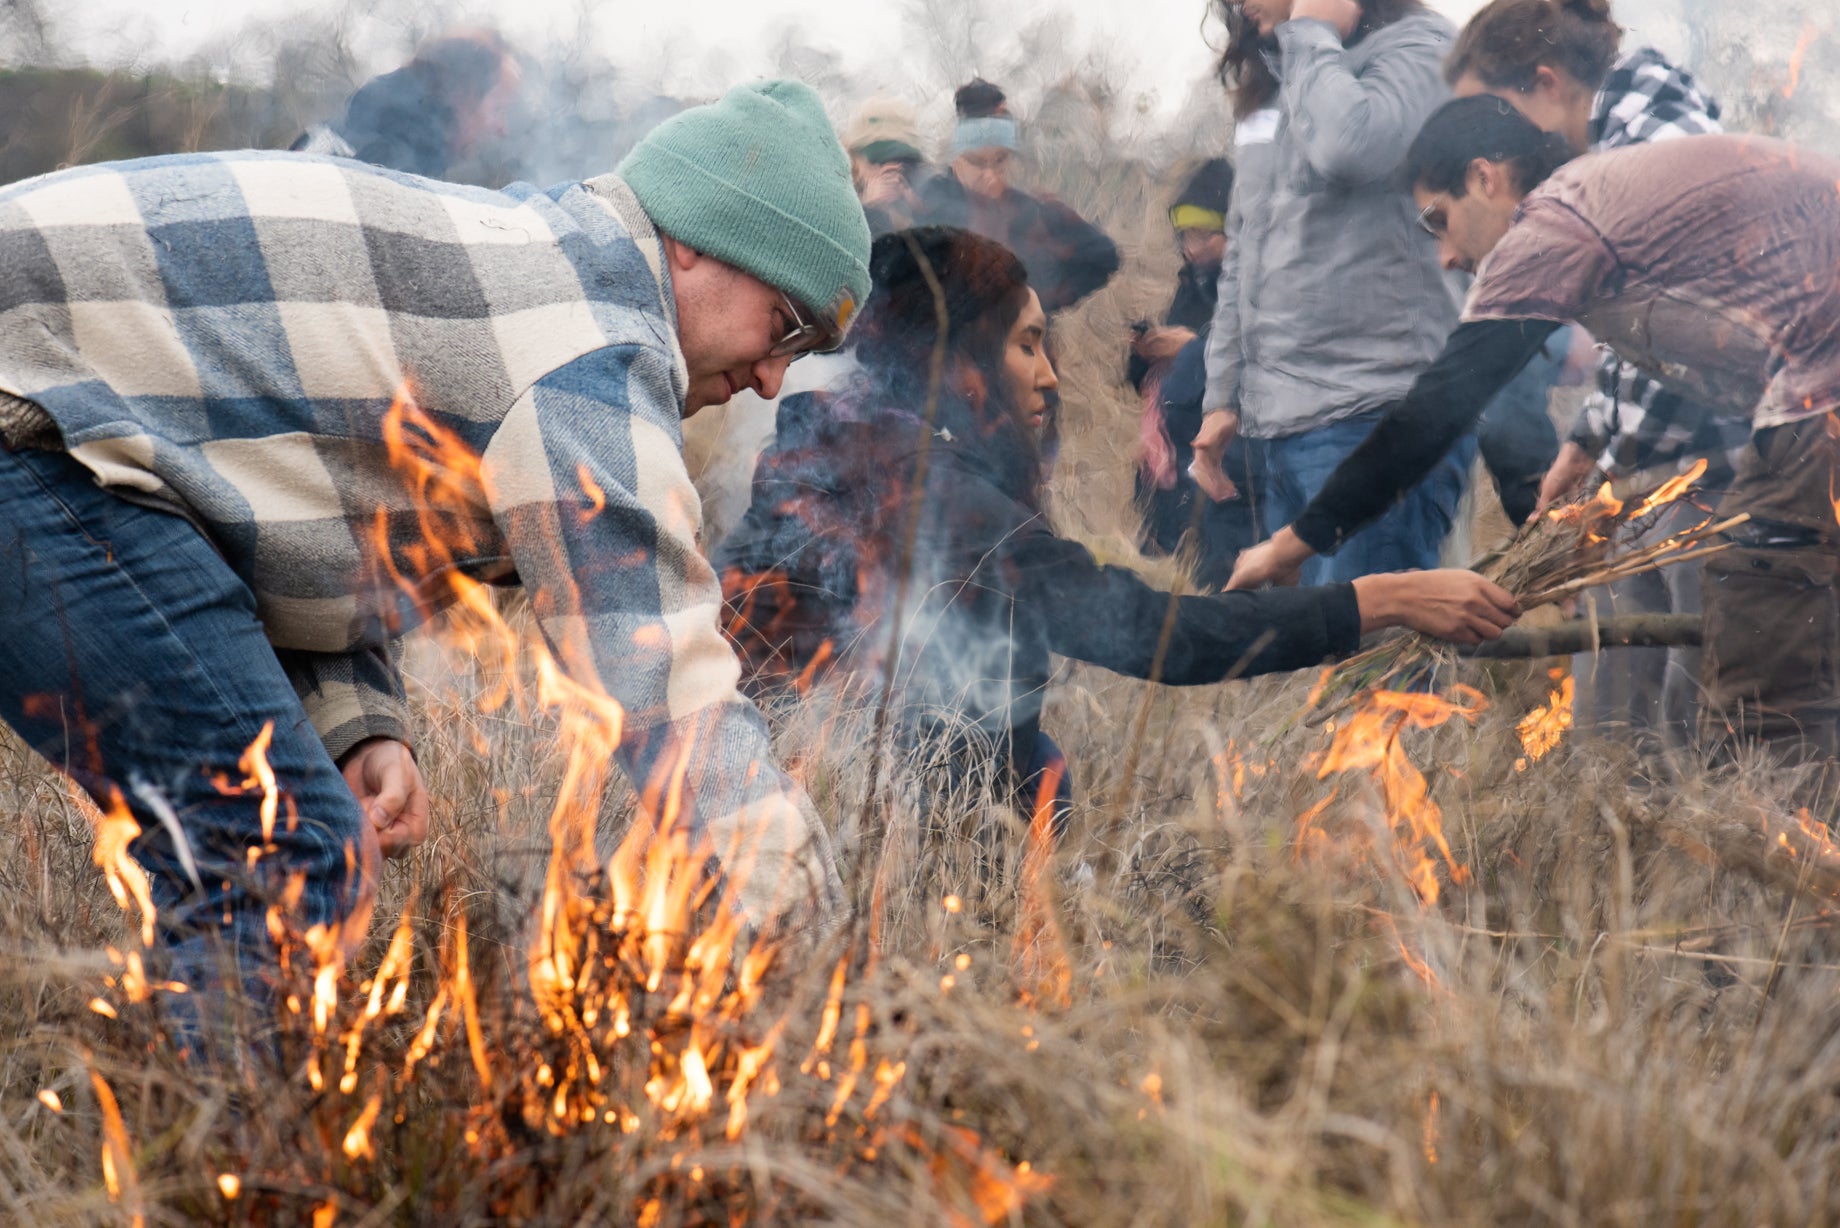 Men and women in jackets light field of deergrass on fire as part of cultural burn in California.